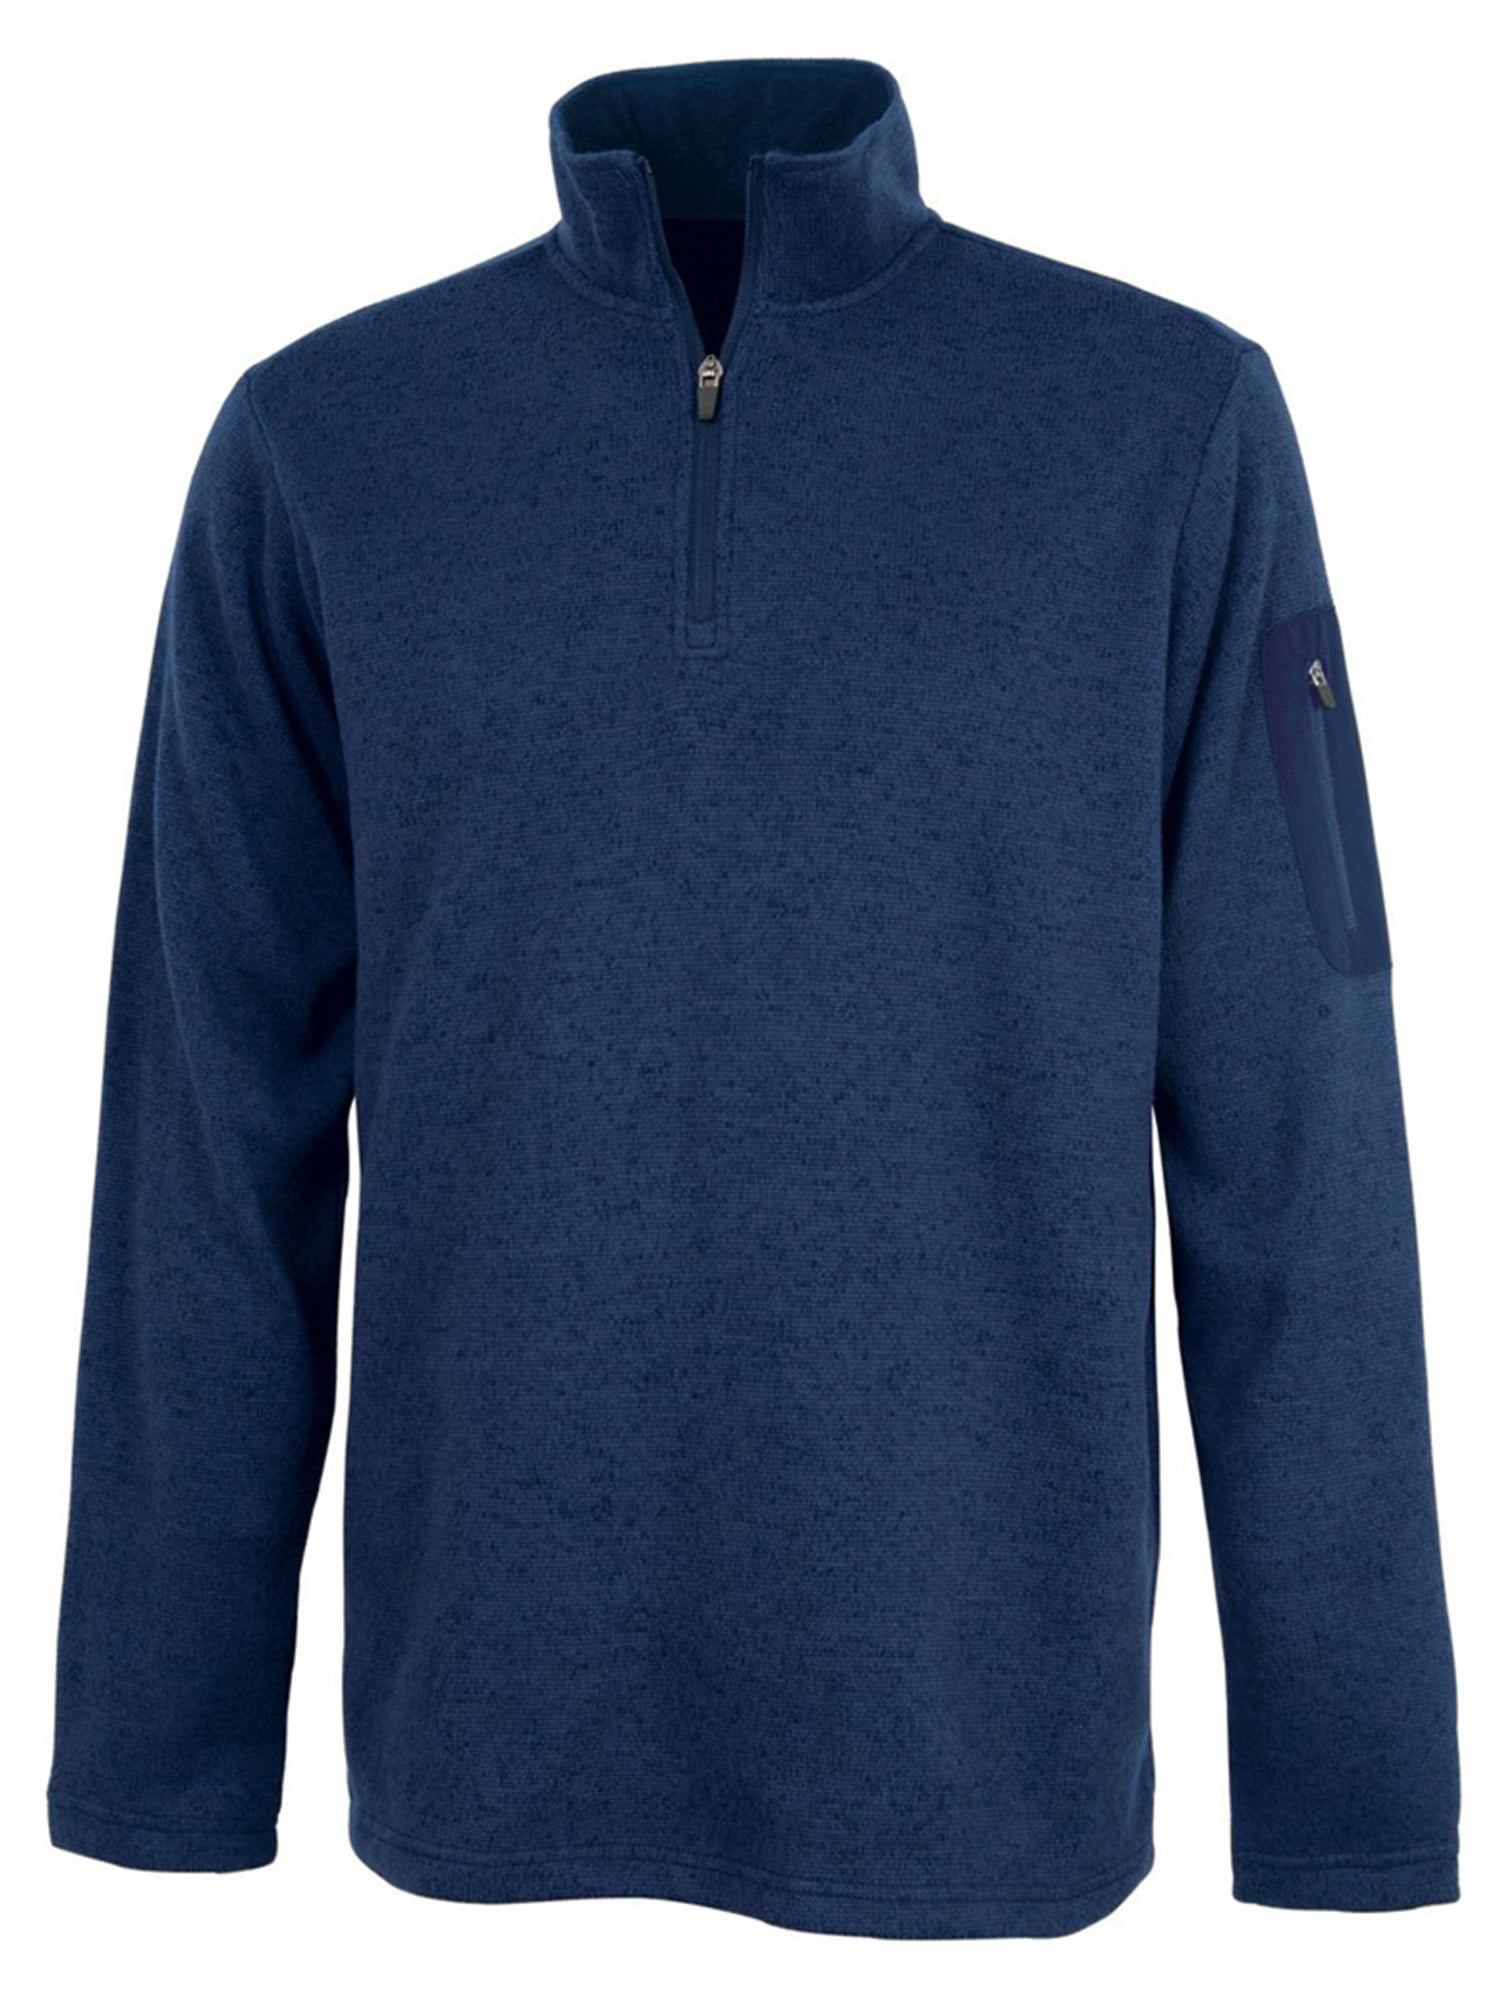 Charles River - charles river apparel men's heathered fleece pullover ...